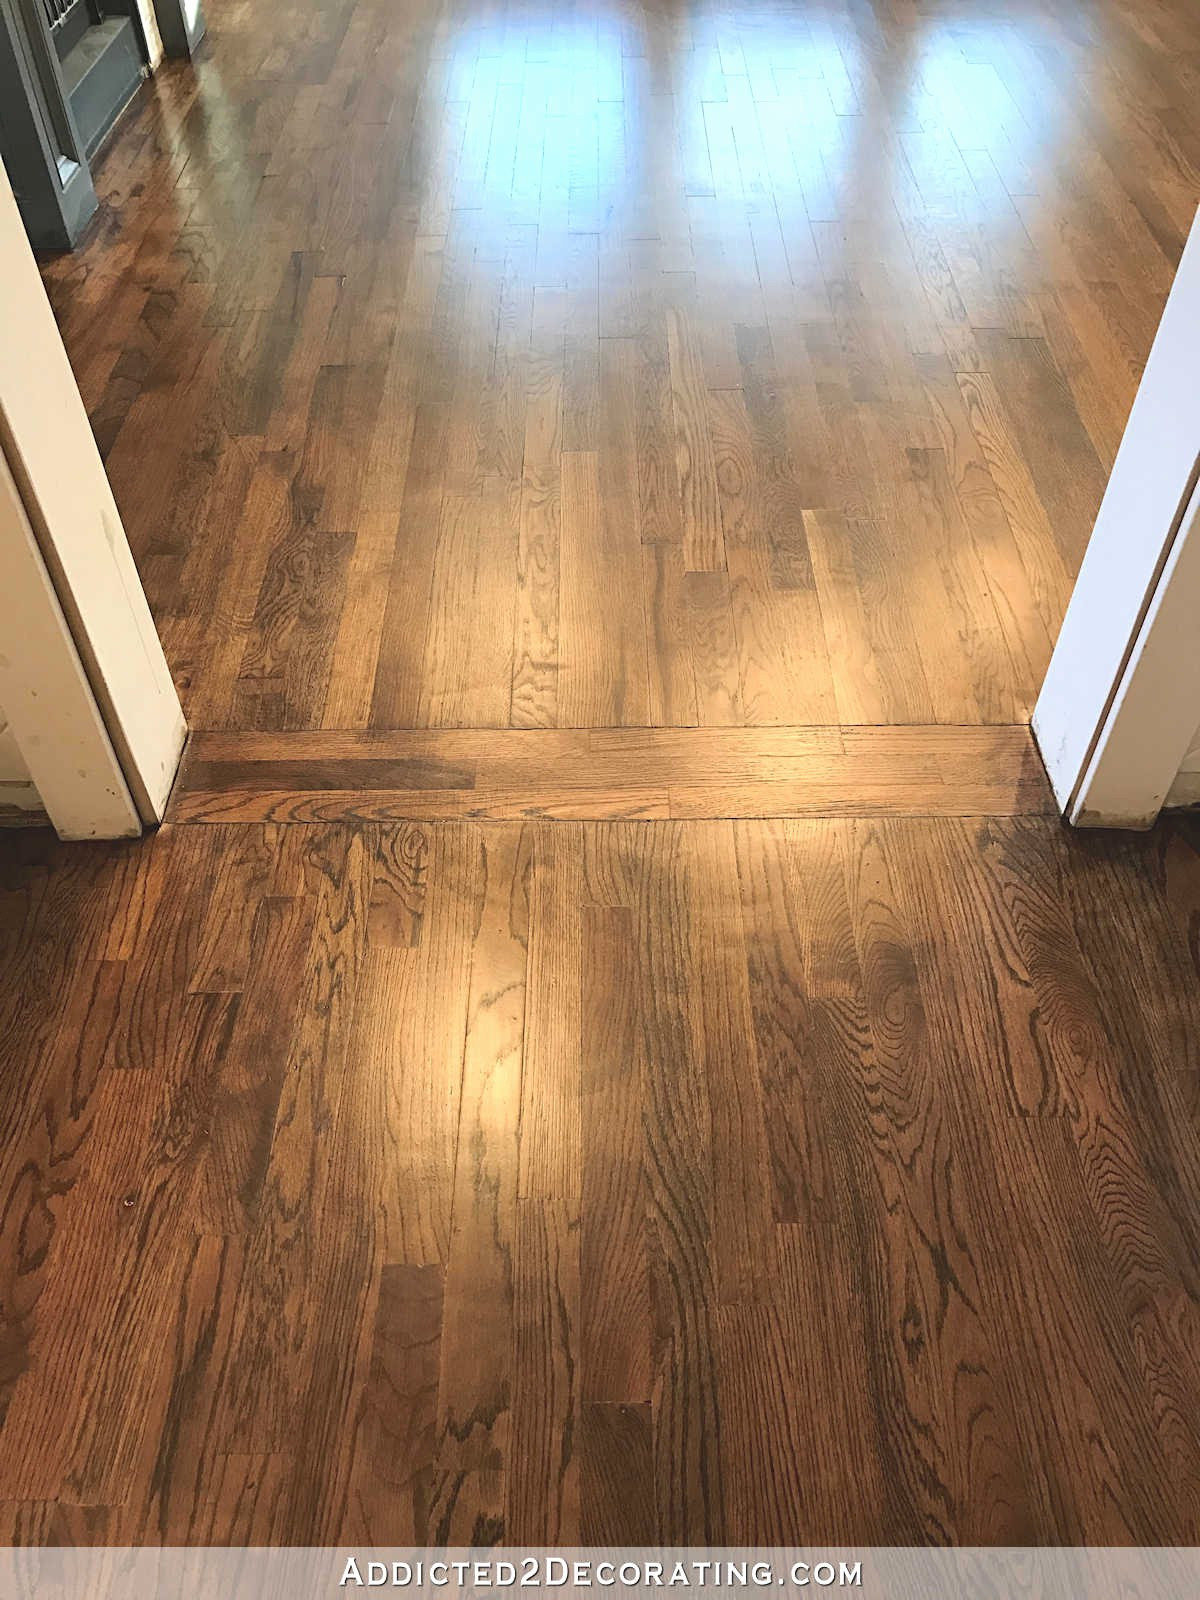 13 Great How to Refinish Hardwood Floors with Pet Stains 2024 free download how to refinish hardwood floors with pet stains of image of best way to restore hardwood floors without sanding intended for will refinishingod floors pet stains old without sanding wood wit